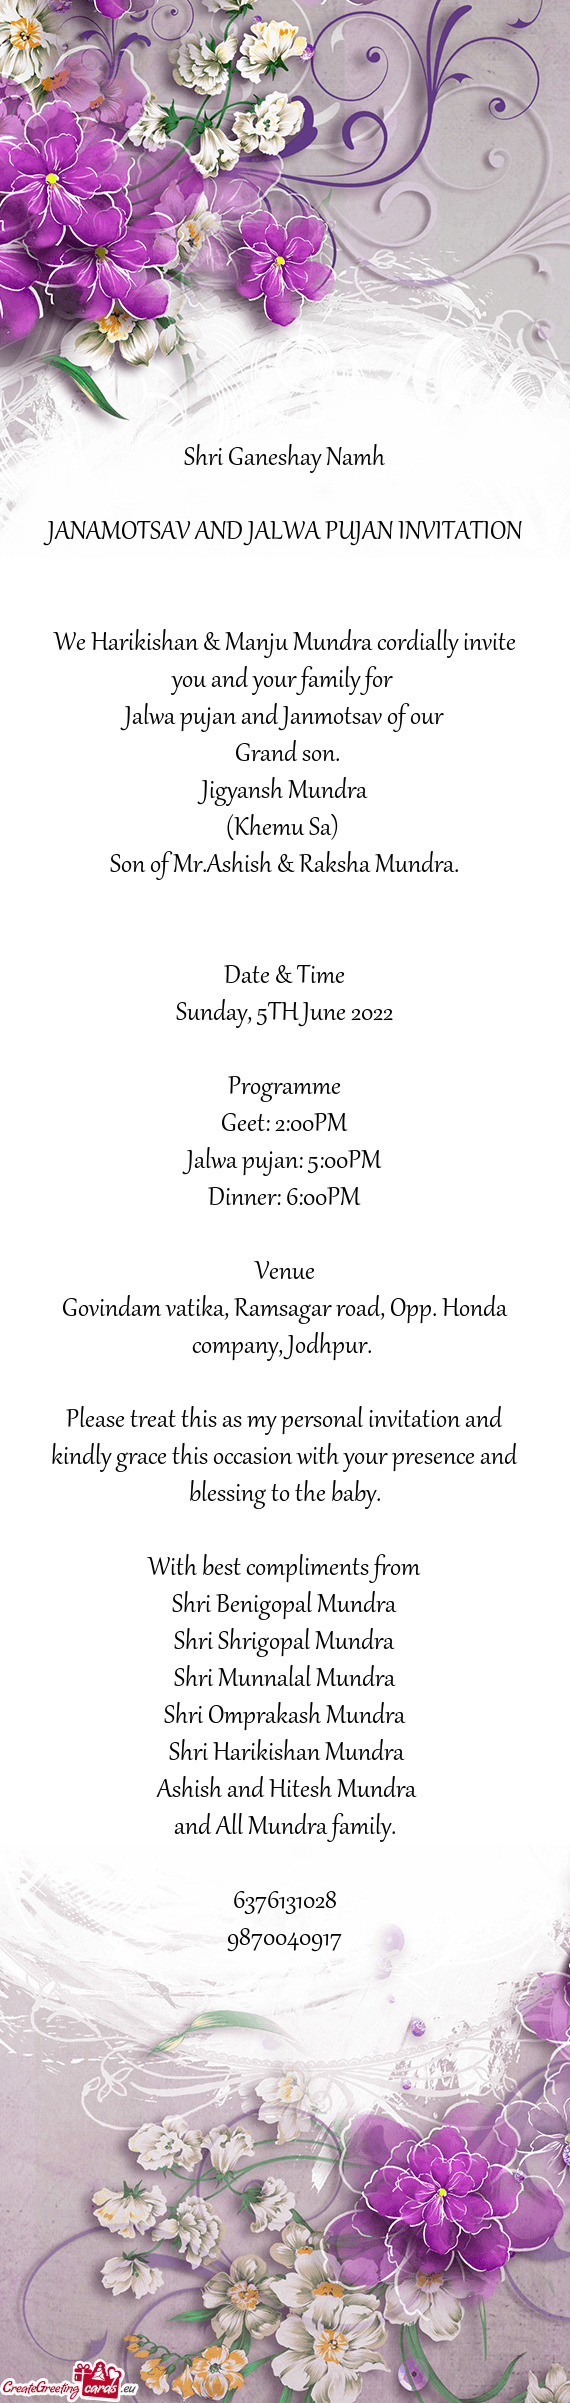 We Harikishan & Manju Mundra cordially invite you and your family for